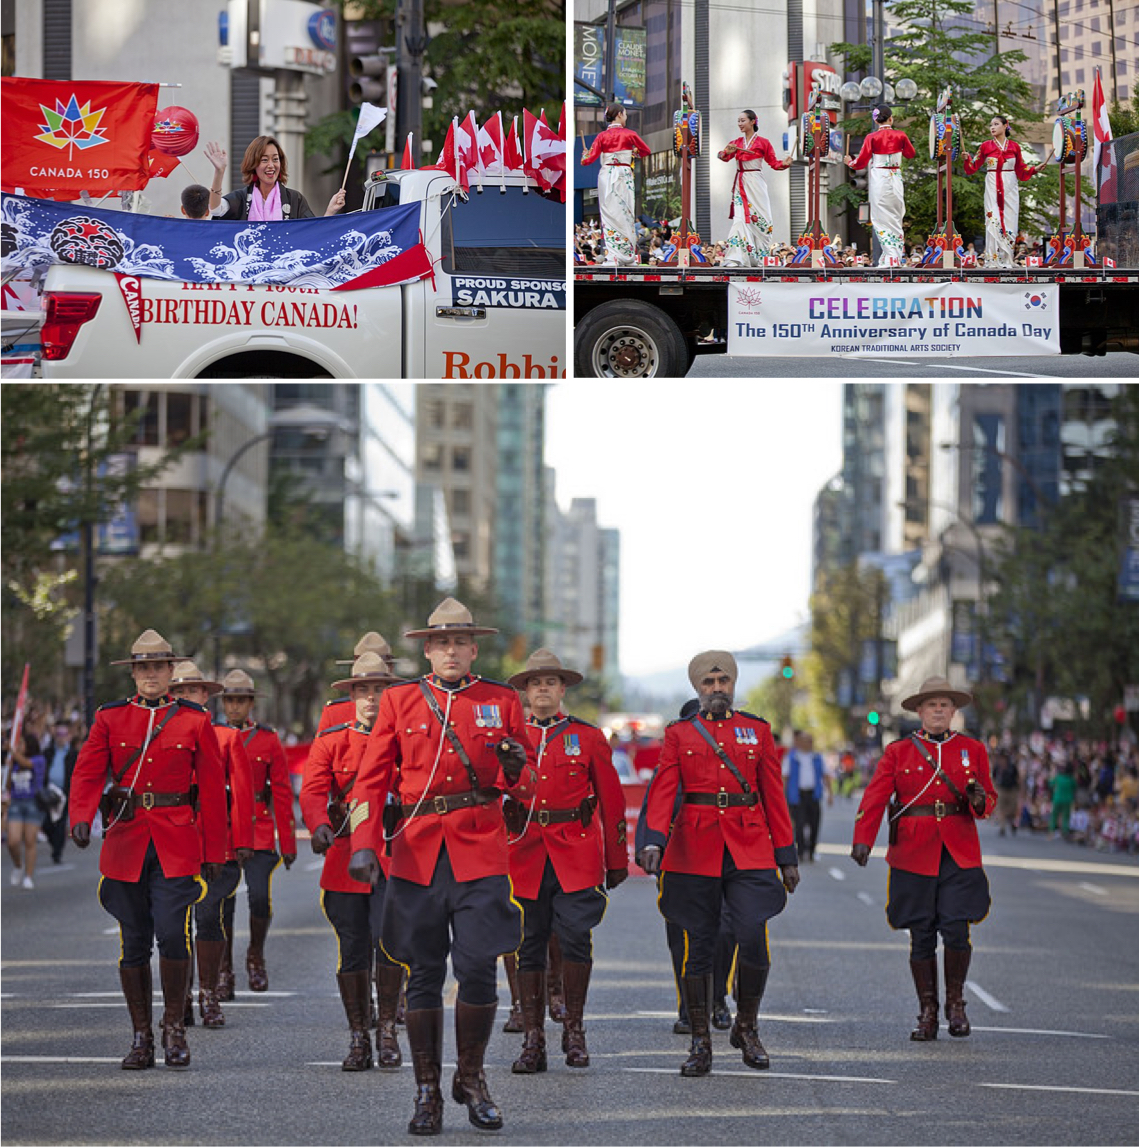 2017 Canada Day Celebrations in Vancouver